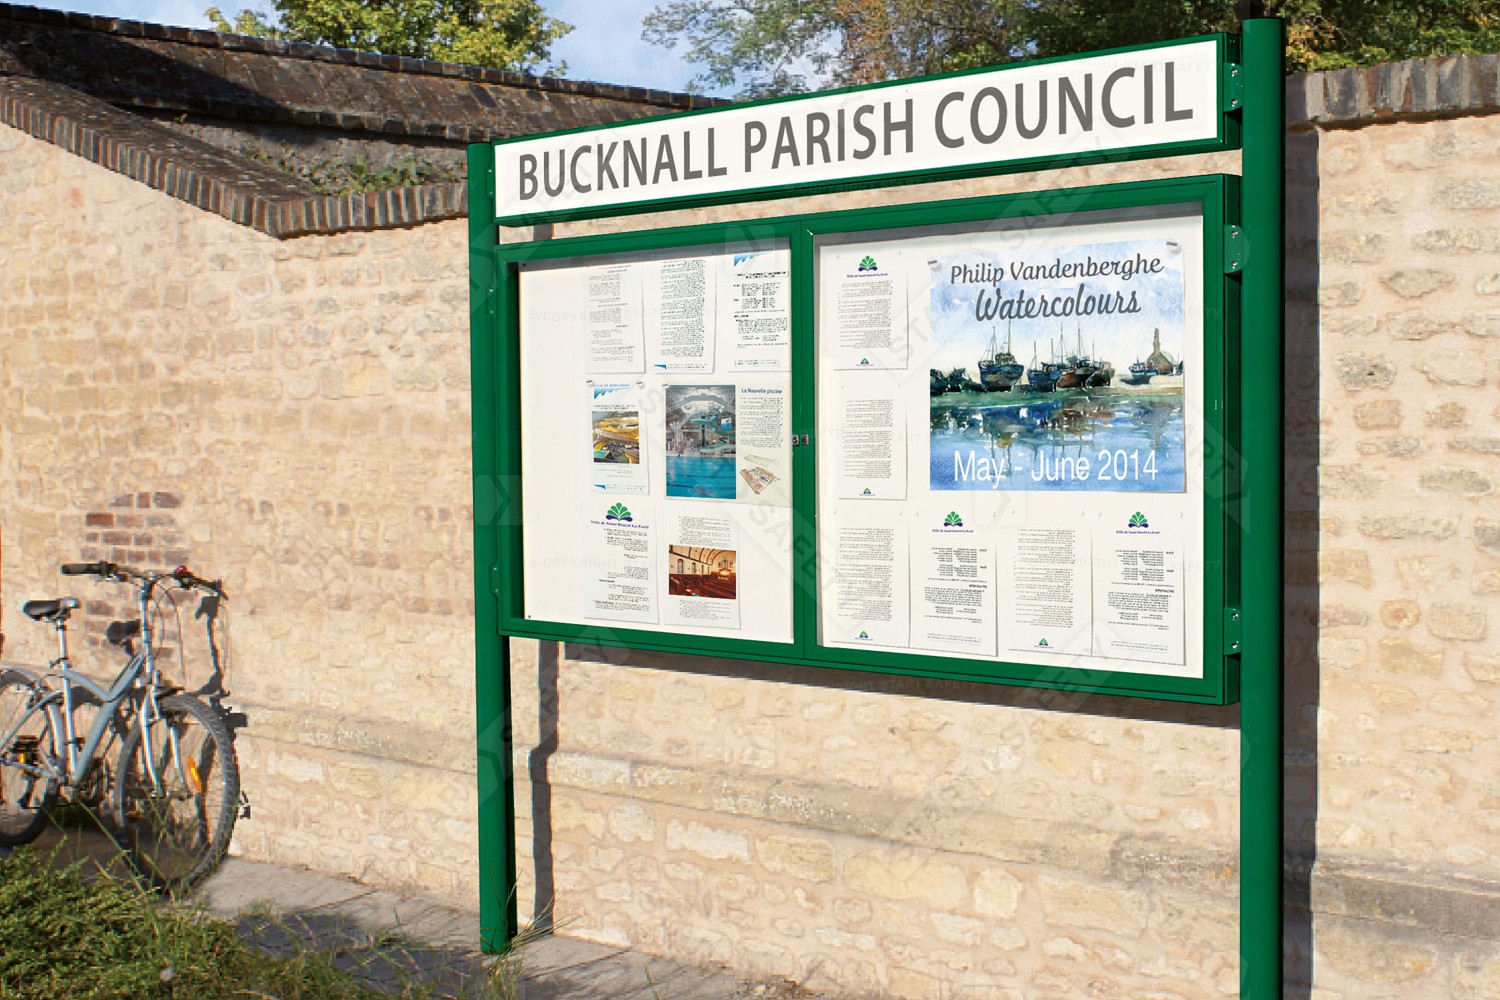 Information Board For A Parish Council